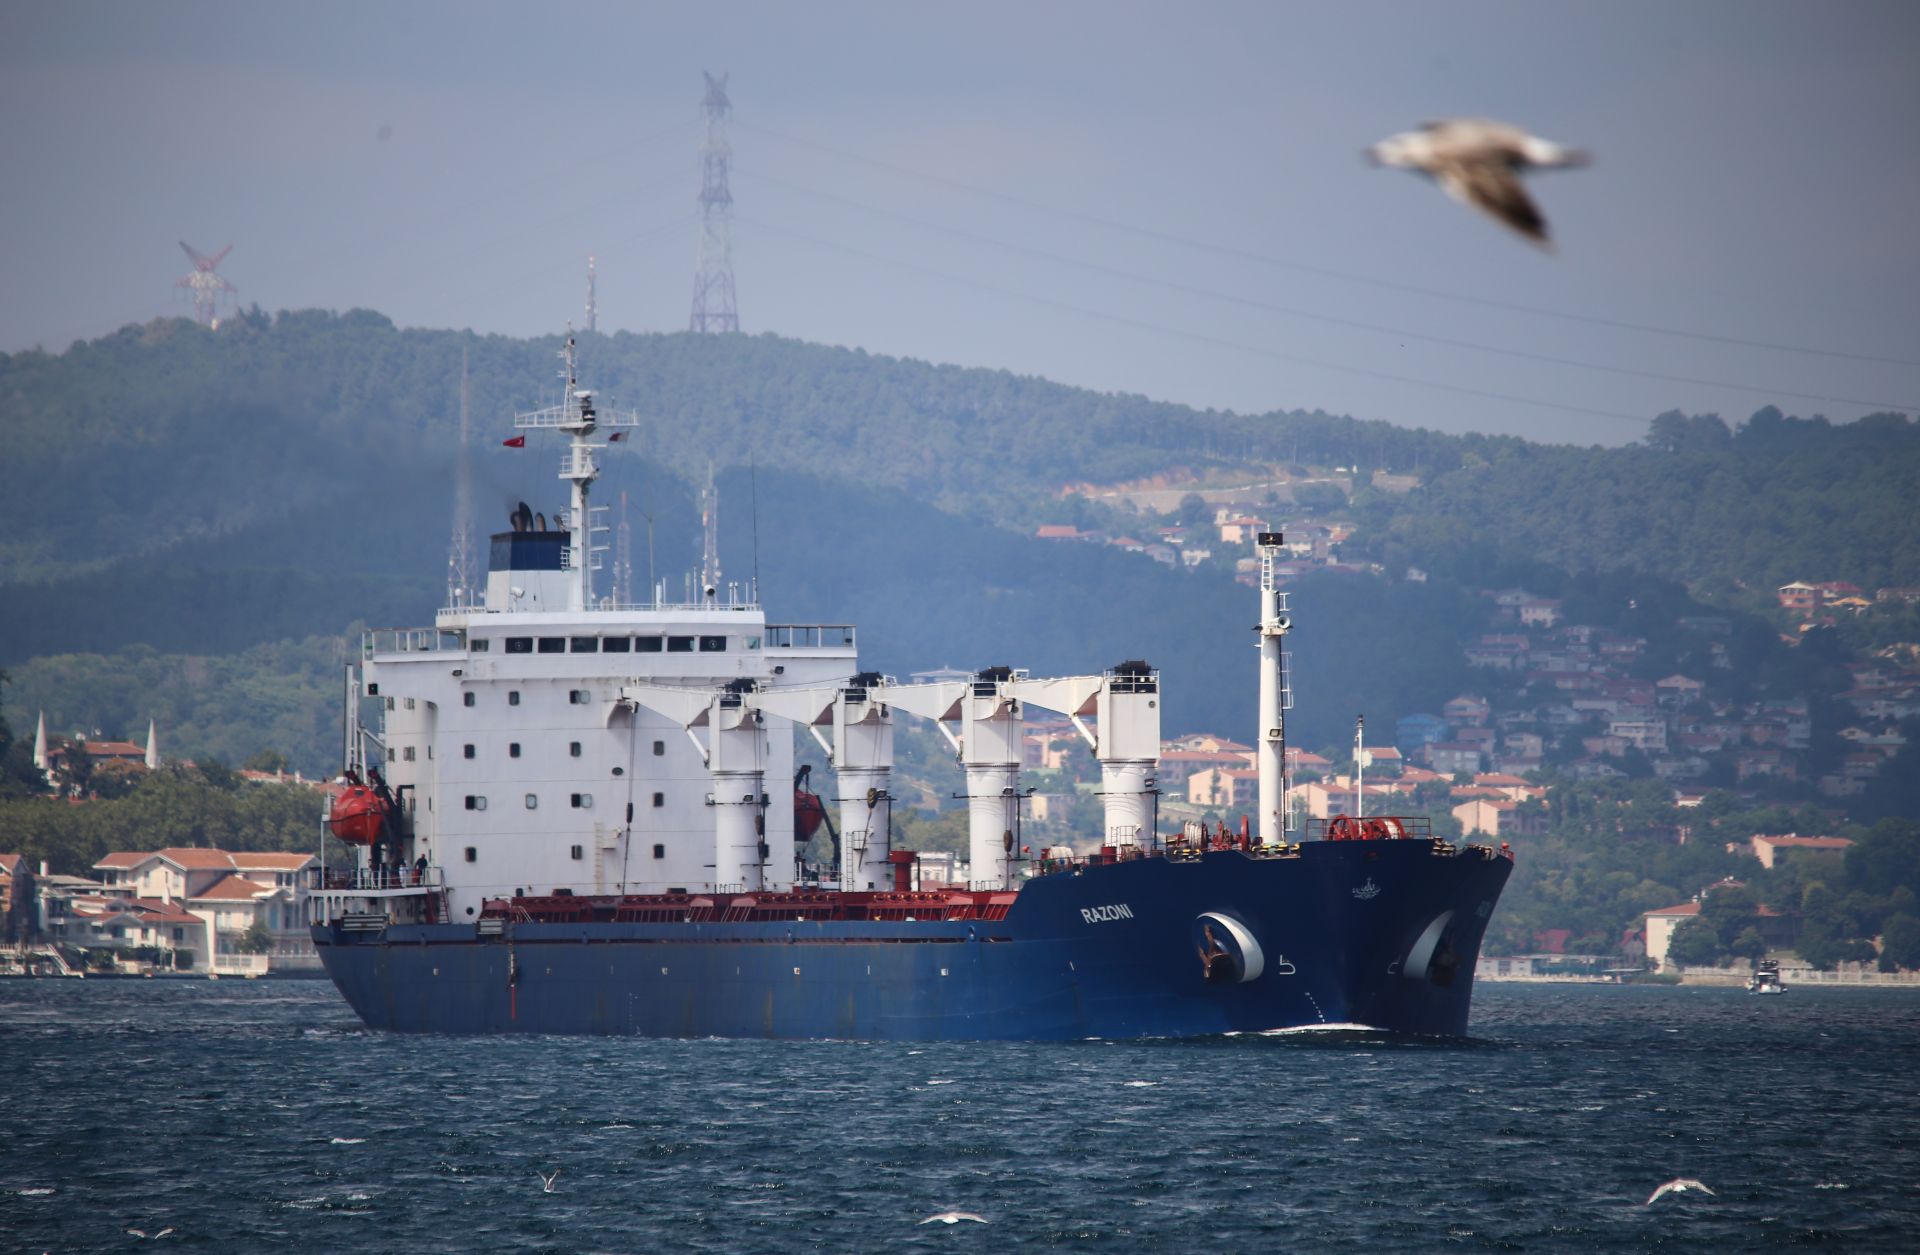 The cargo ship Razoni, which departed from Ukraine's Odesa Port within the framework of the now-defunct Black Sea Grain Initiative, is pictured in the Bosphorus Strait on Aug. 3, 2022, in Istanbul, Turkey.